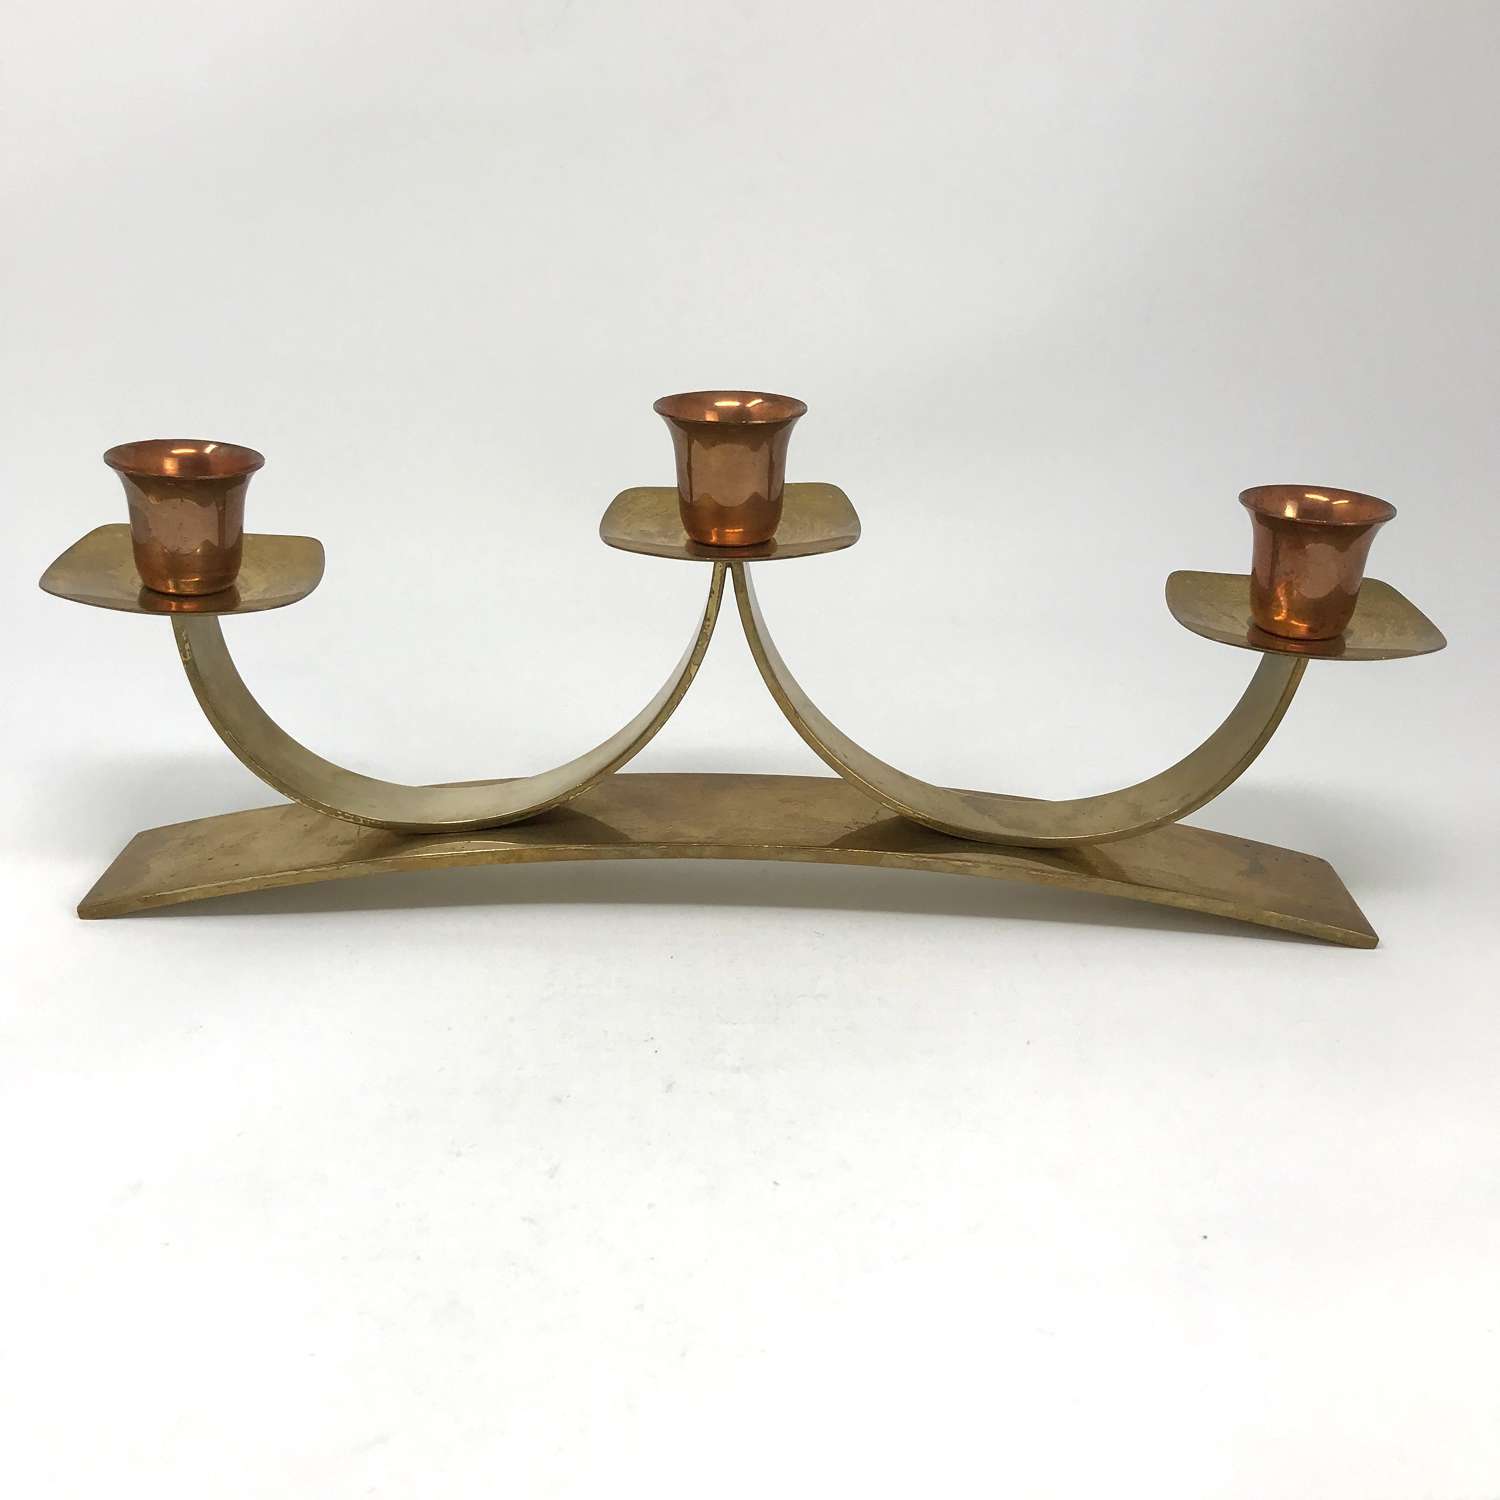 Brass and Copper candle holder Bauhaus influence Germany 1920s